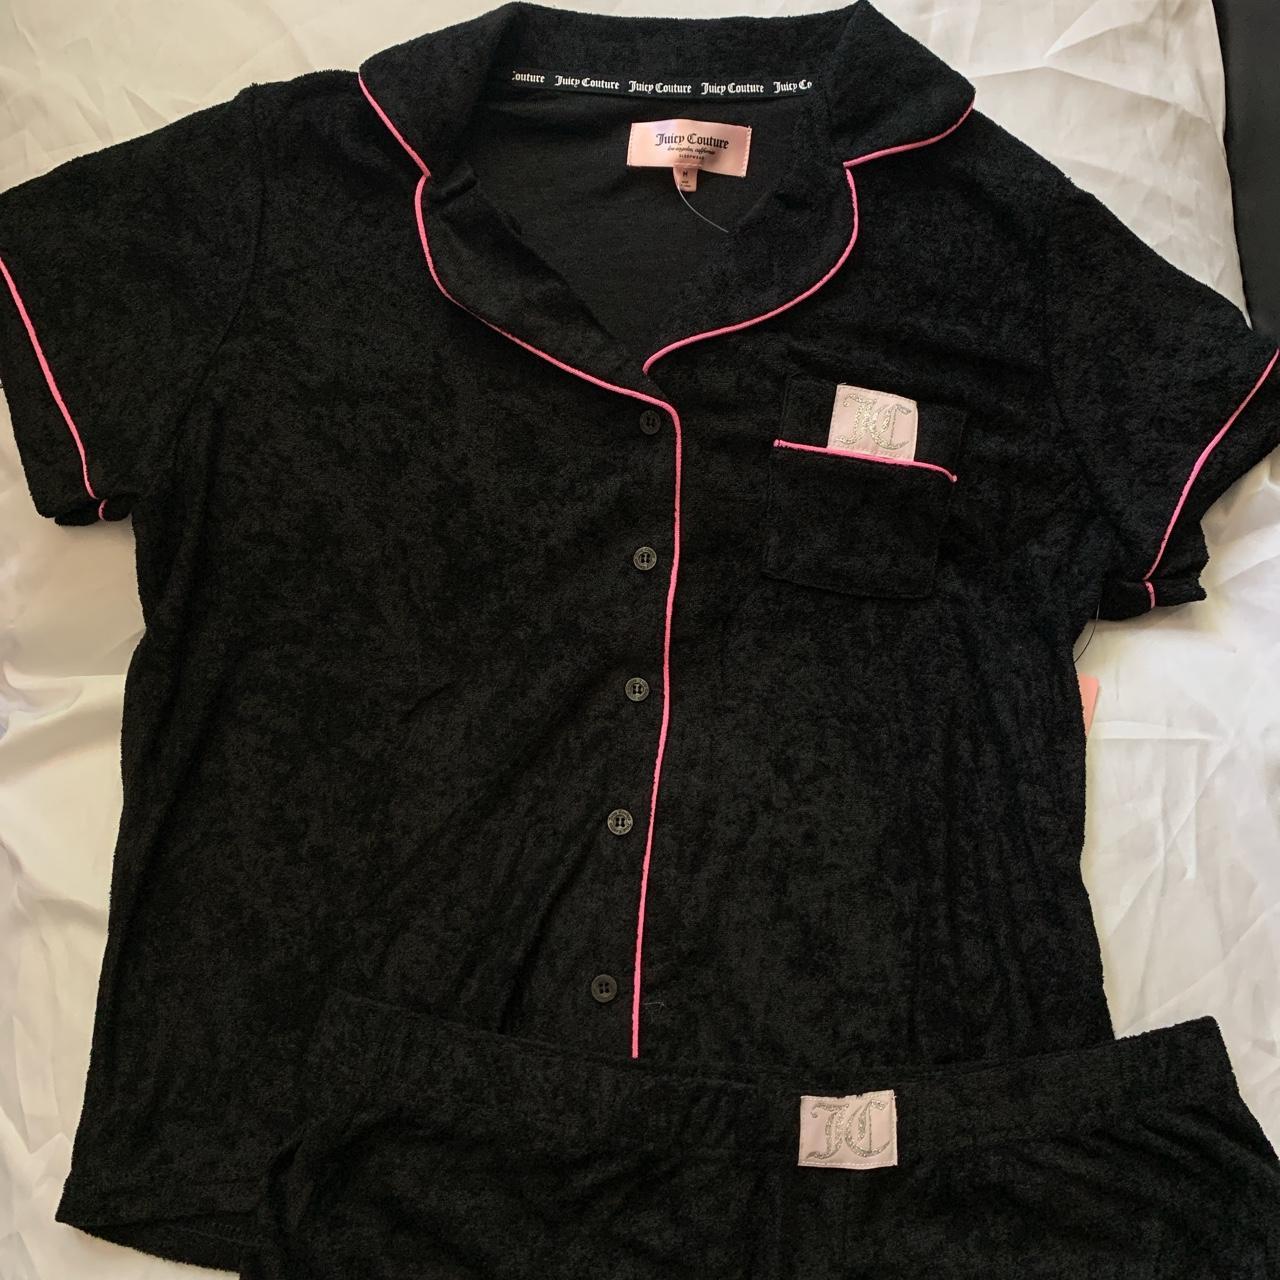 Juicy Couture PJ set with top & shorts - Depop